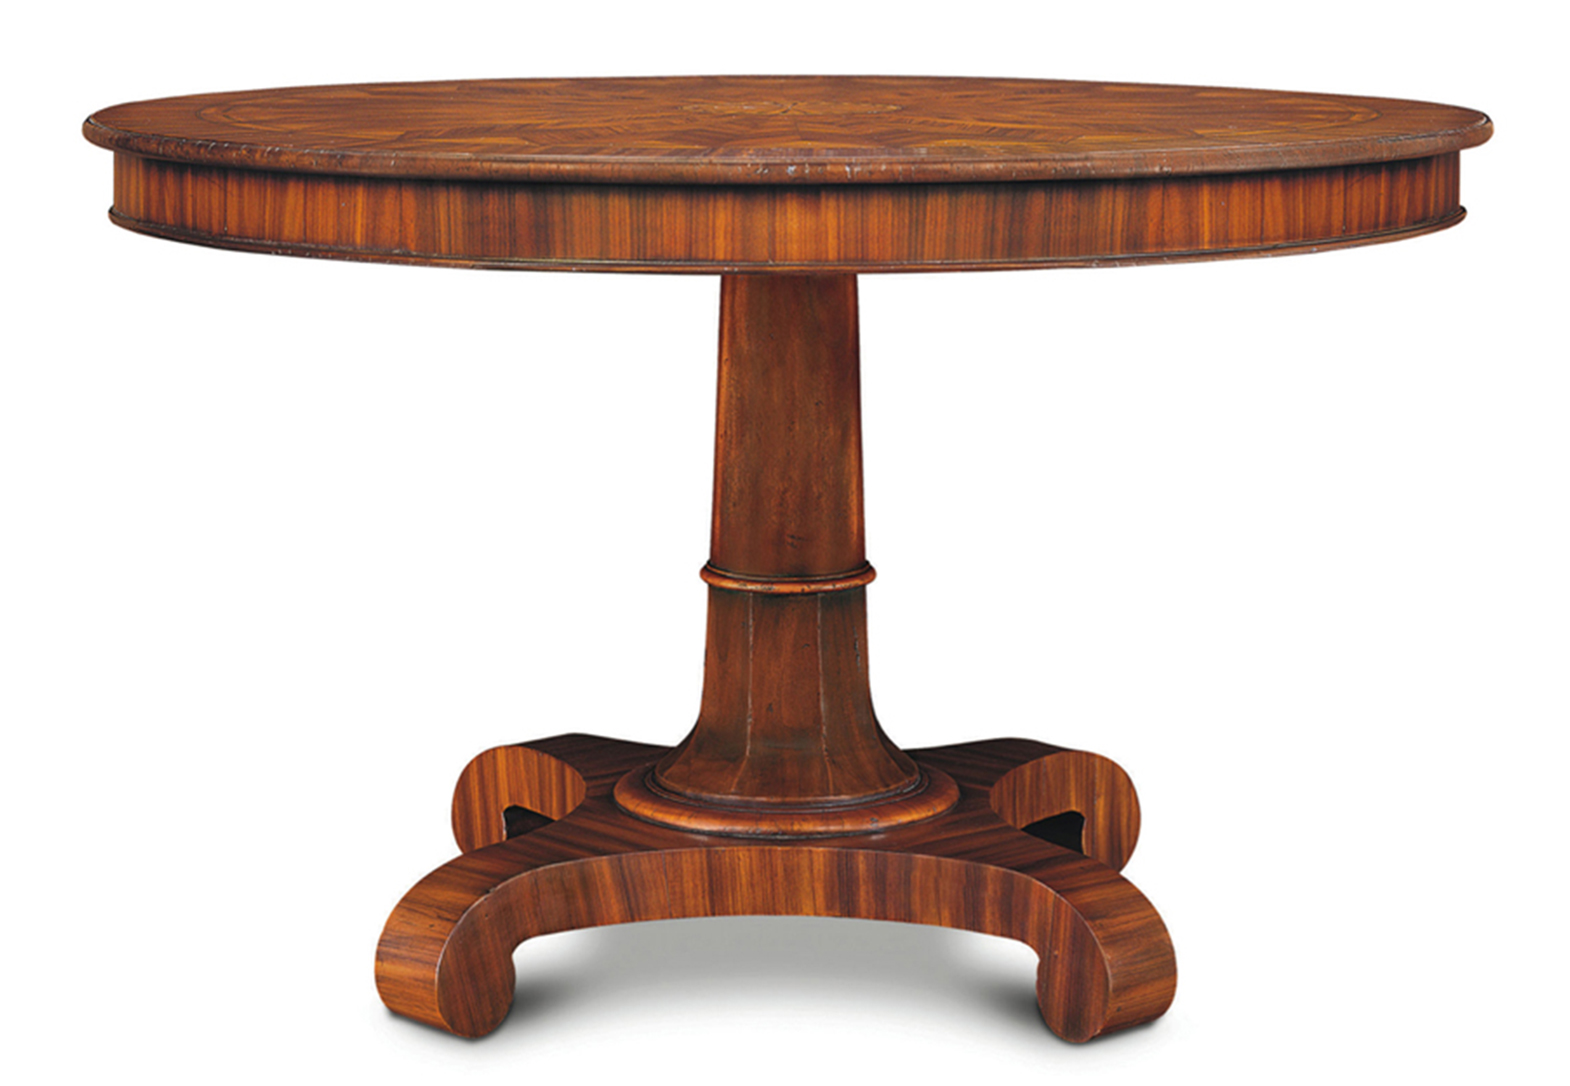 MEXICAN NEOCLASSIC TABLE